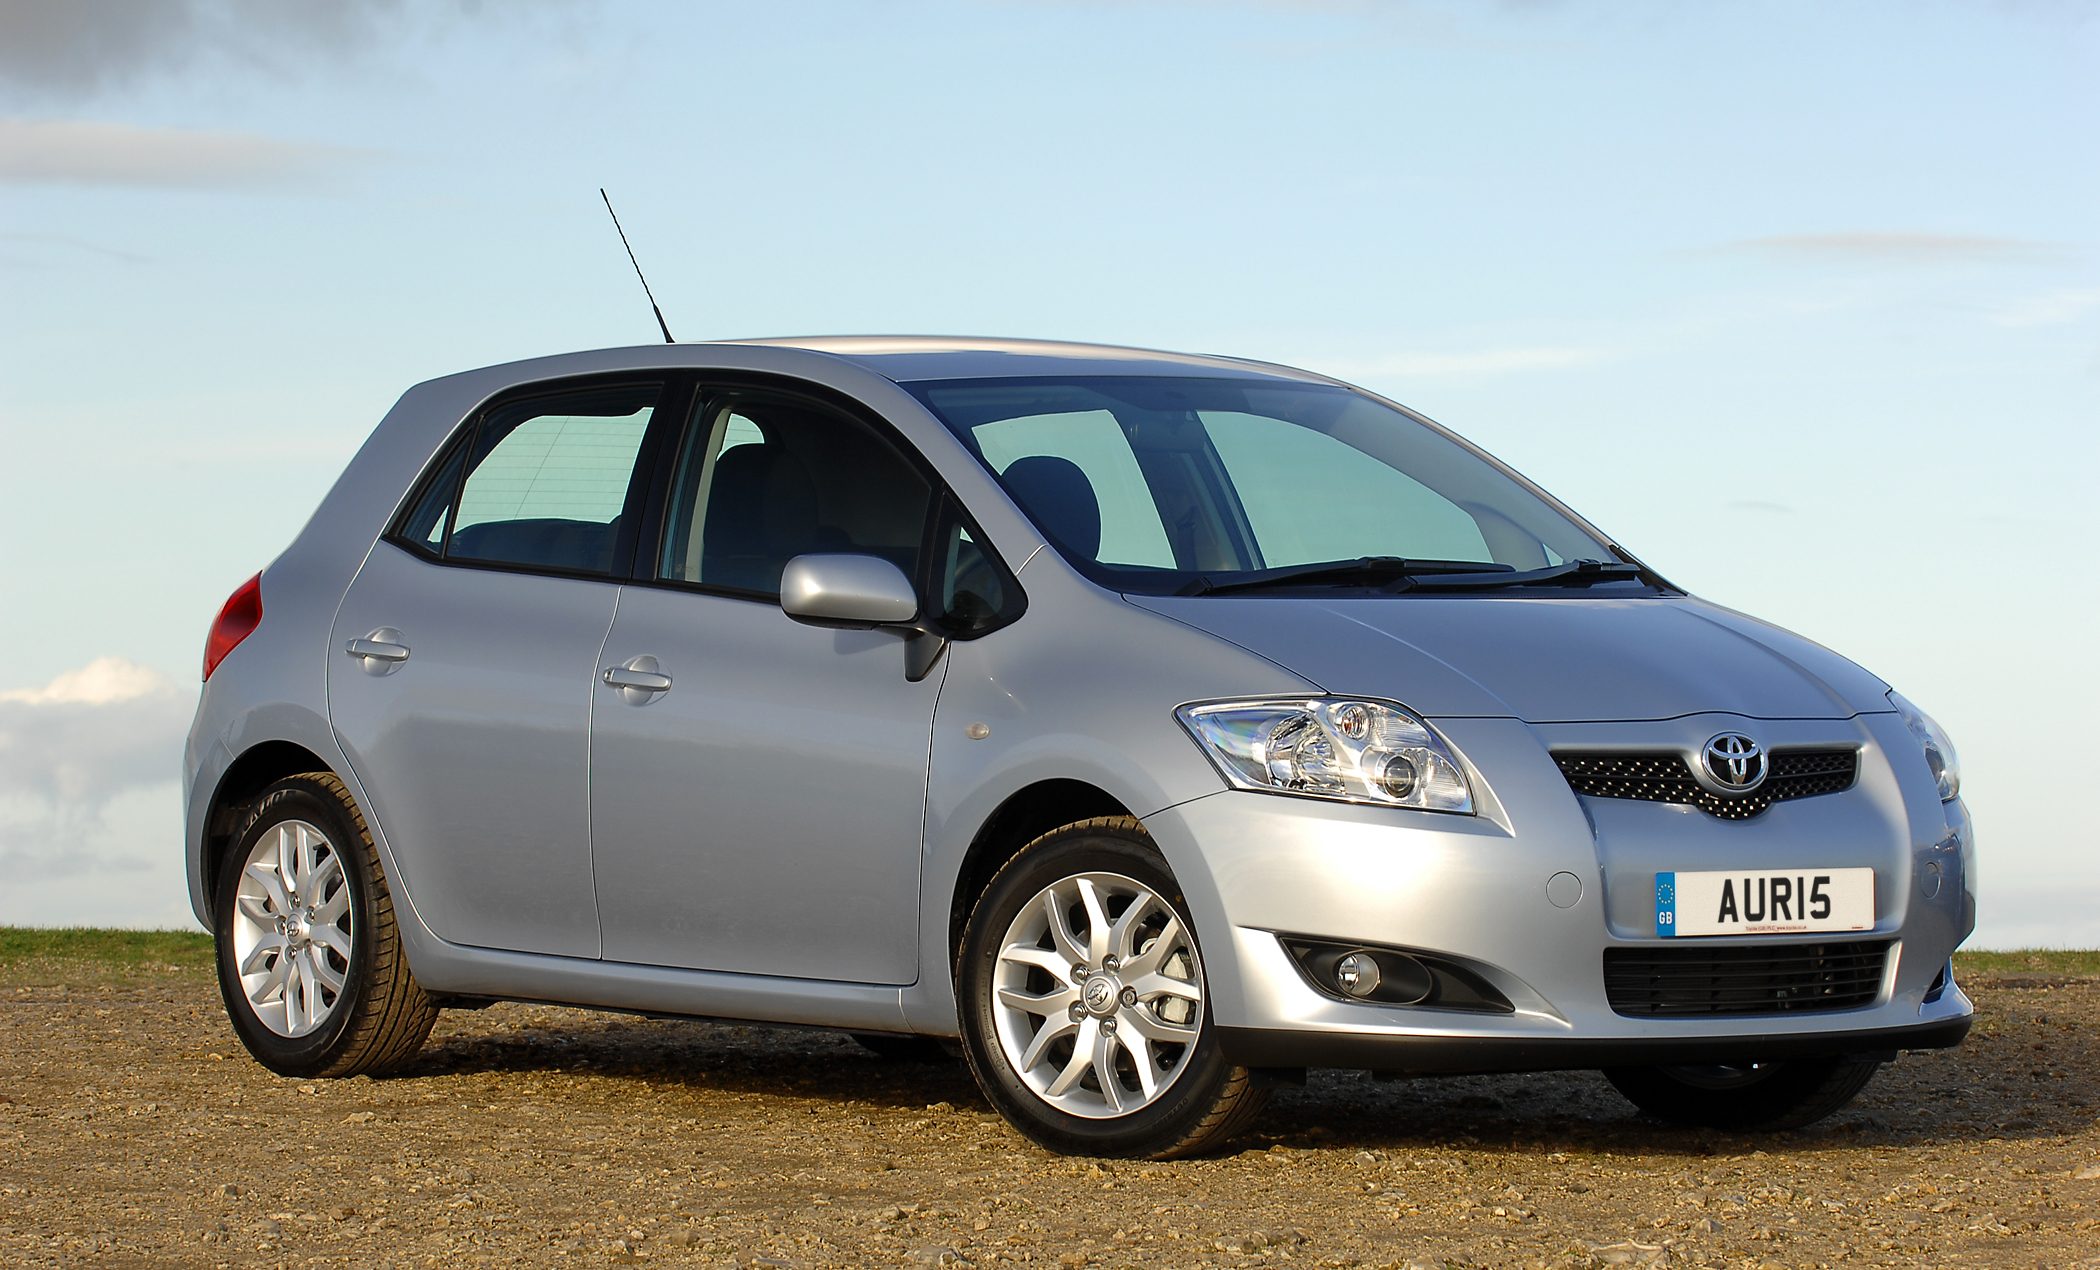 Used Toyota Auris 2007-2012 review